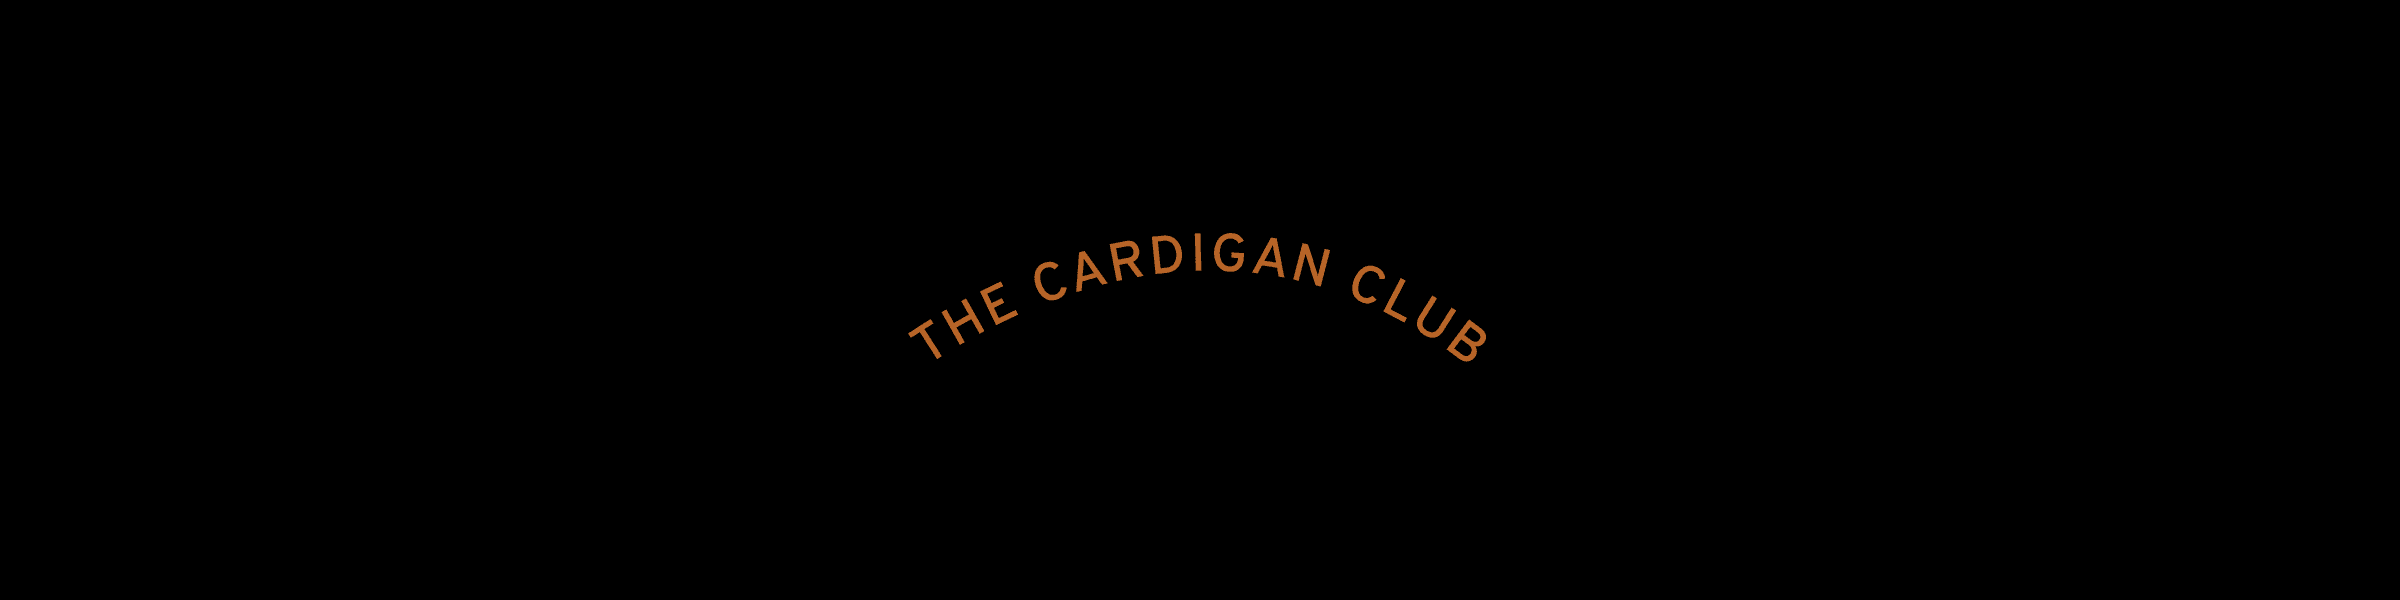 The Cardigan Club - Gold Member Coins